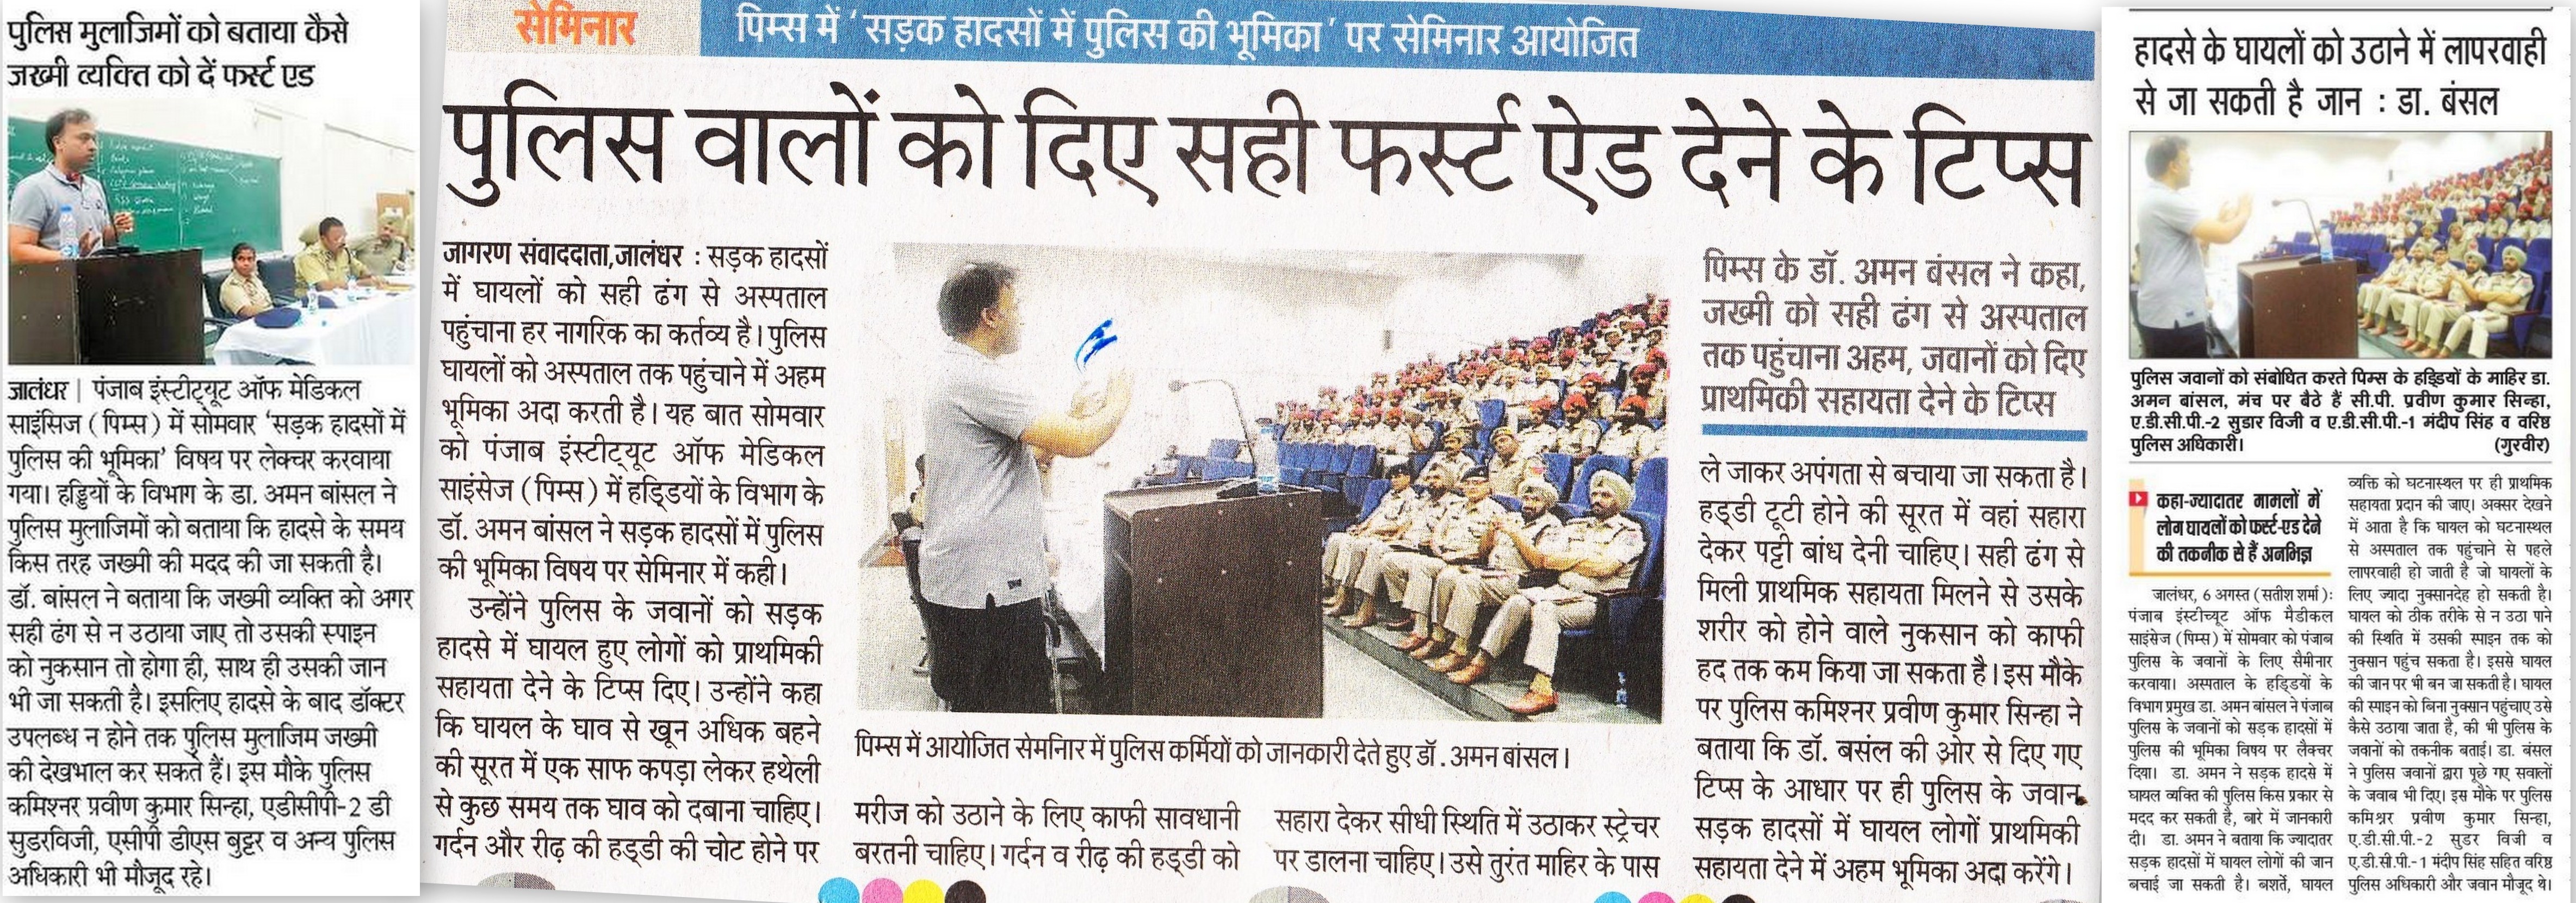 Lecture by Dr. Aman Bansal on “How to provide first aid to Road Accidents Victims”